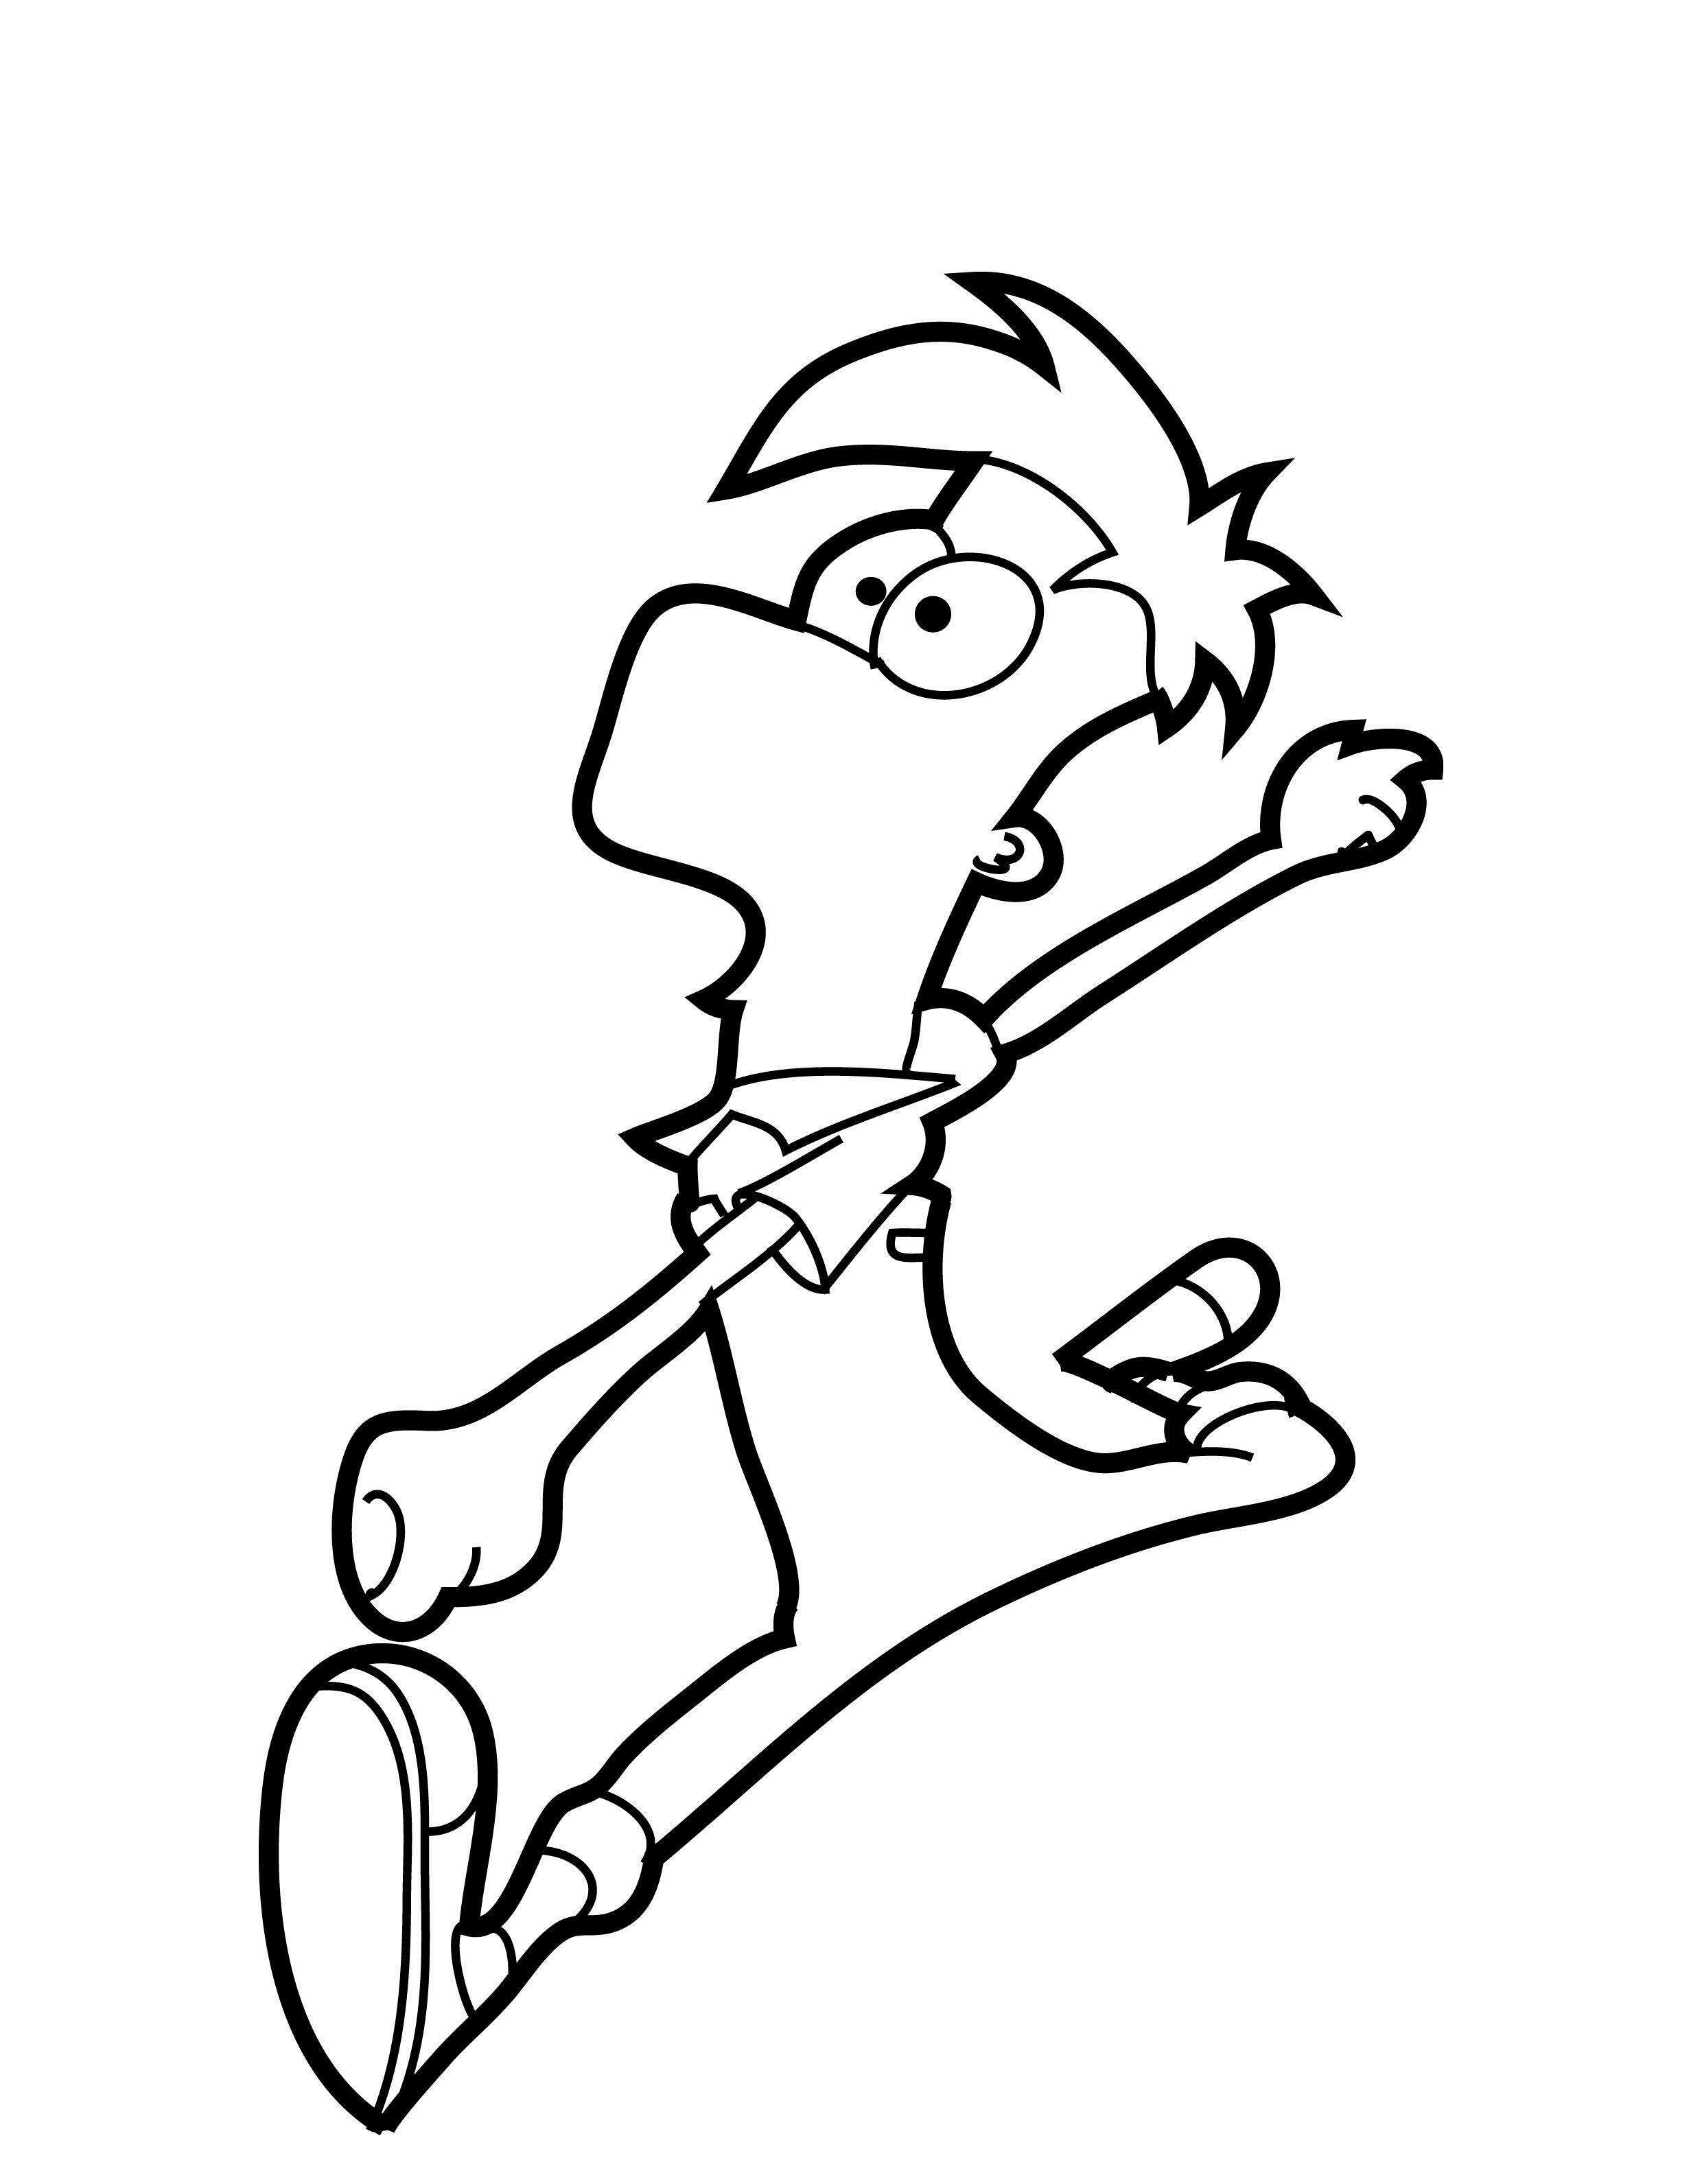 Phineas and Ferbs Images Coloring Page